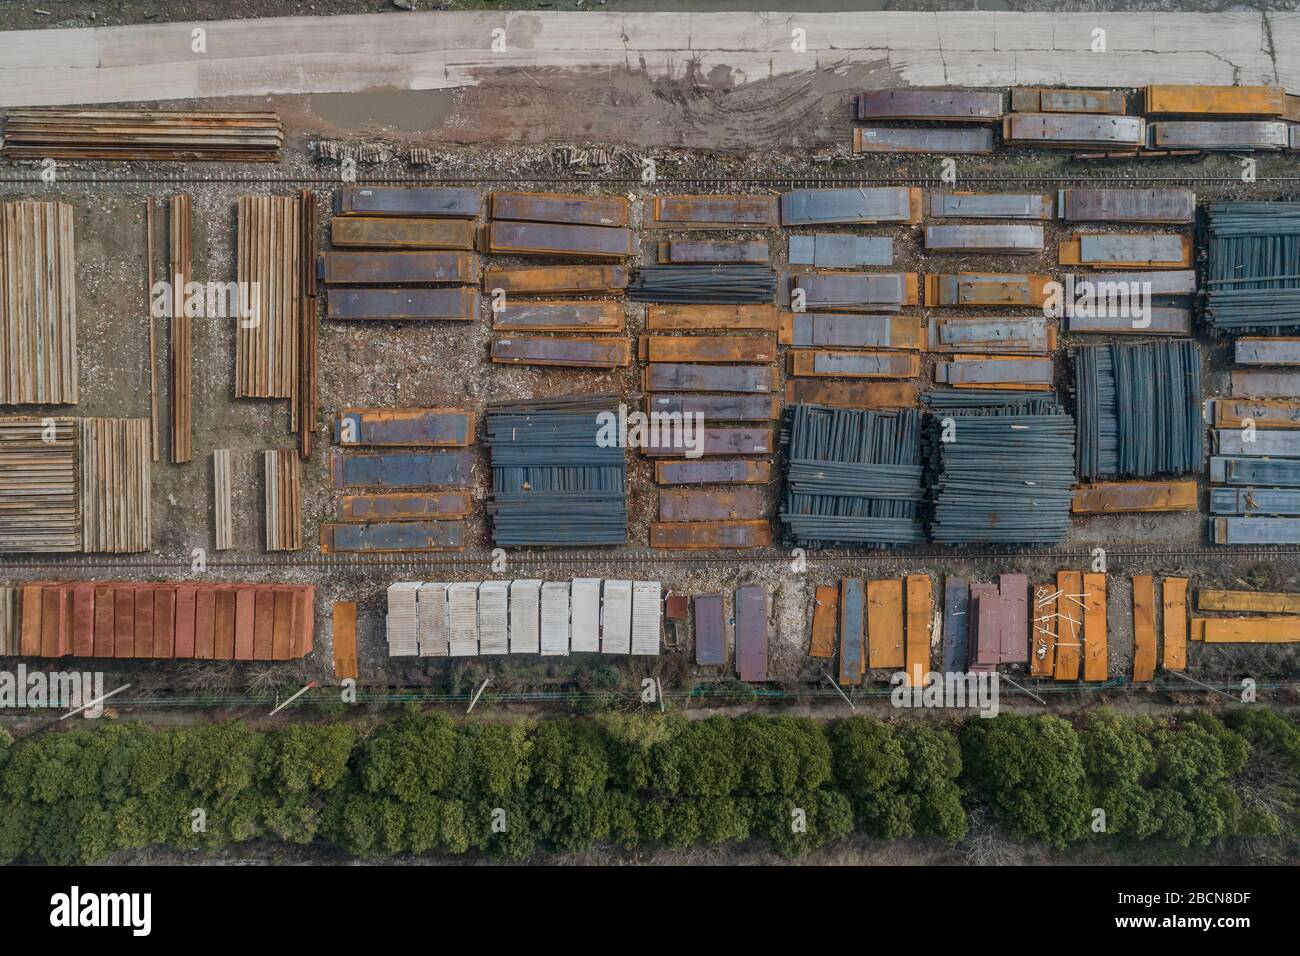 aerial view of steel plates and metal profiles stocked in a factory Stock Photo